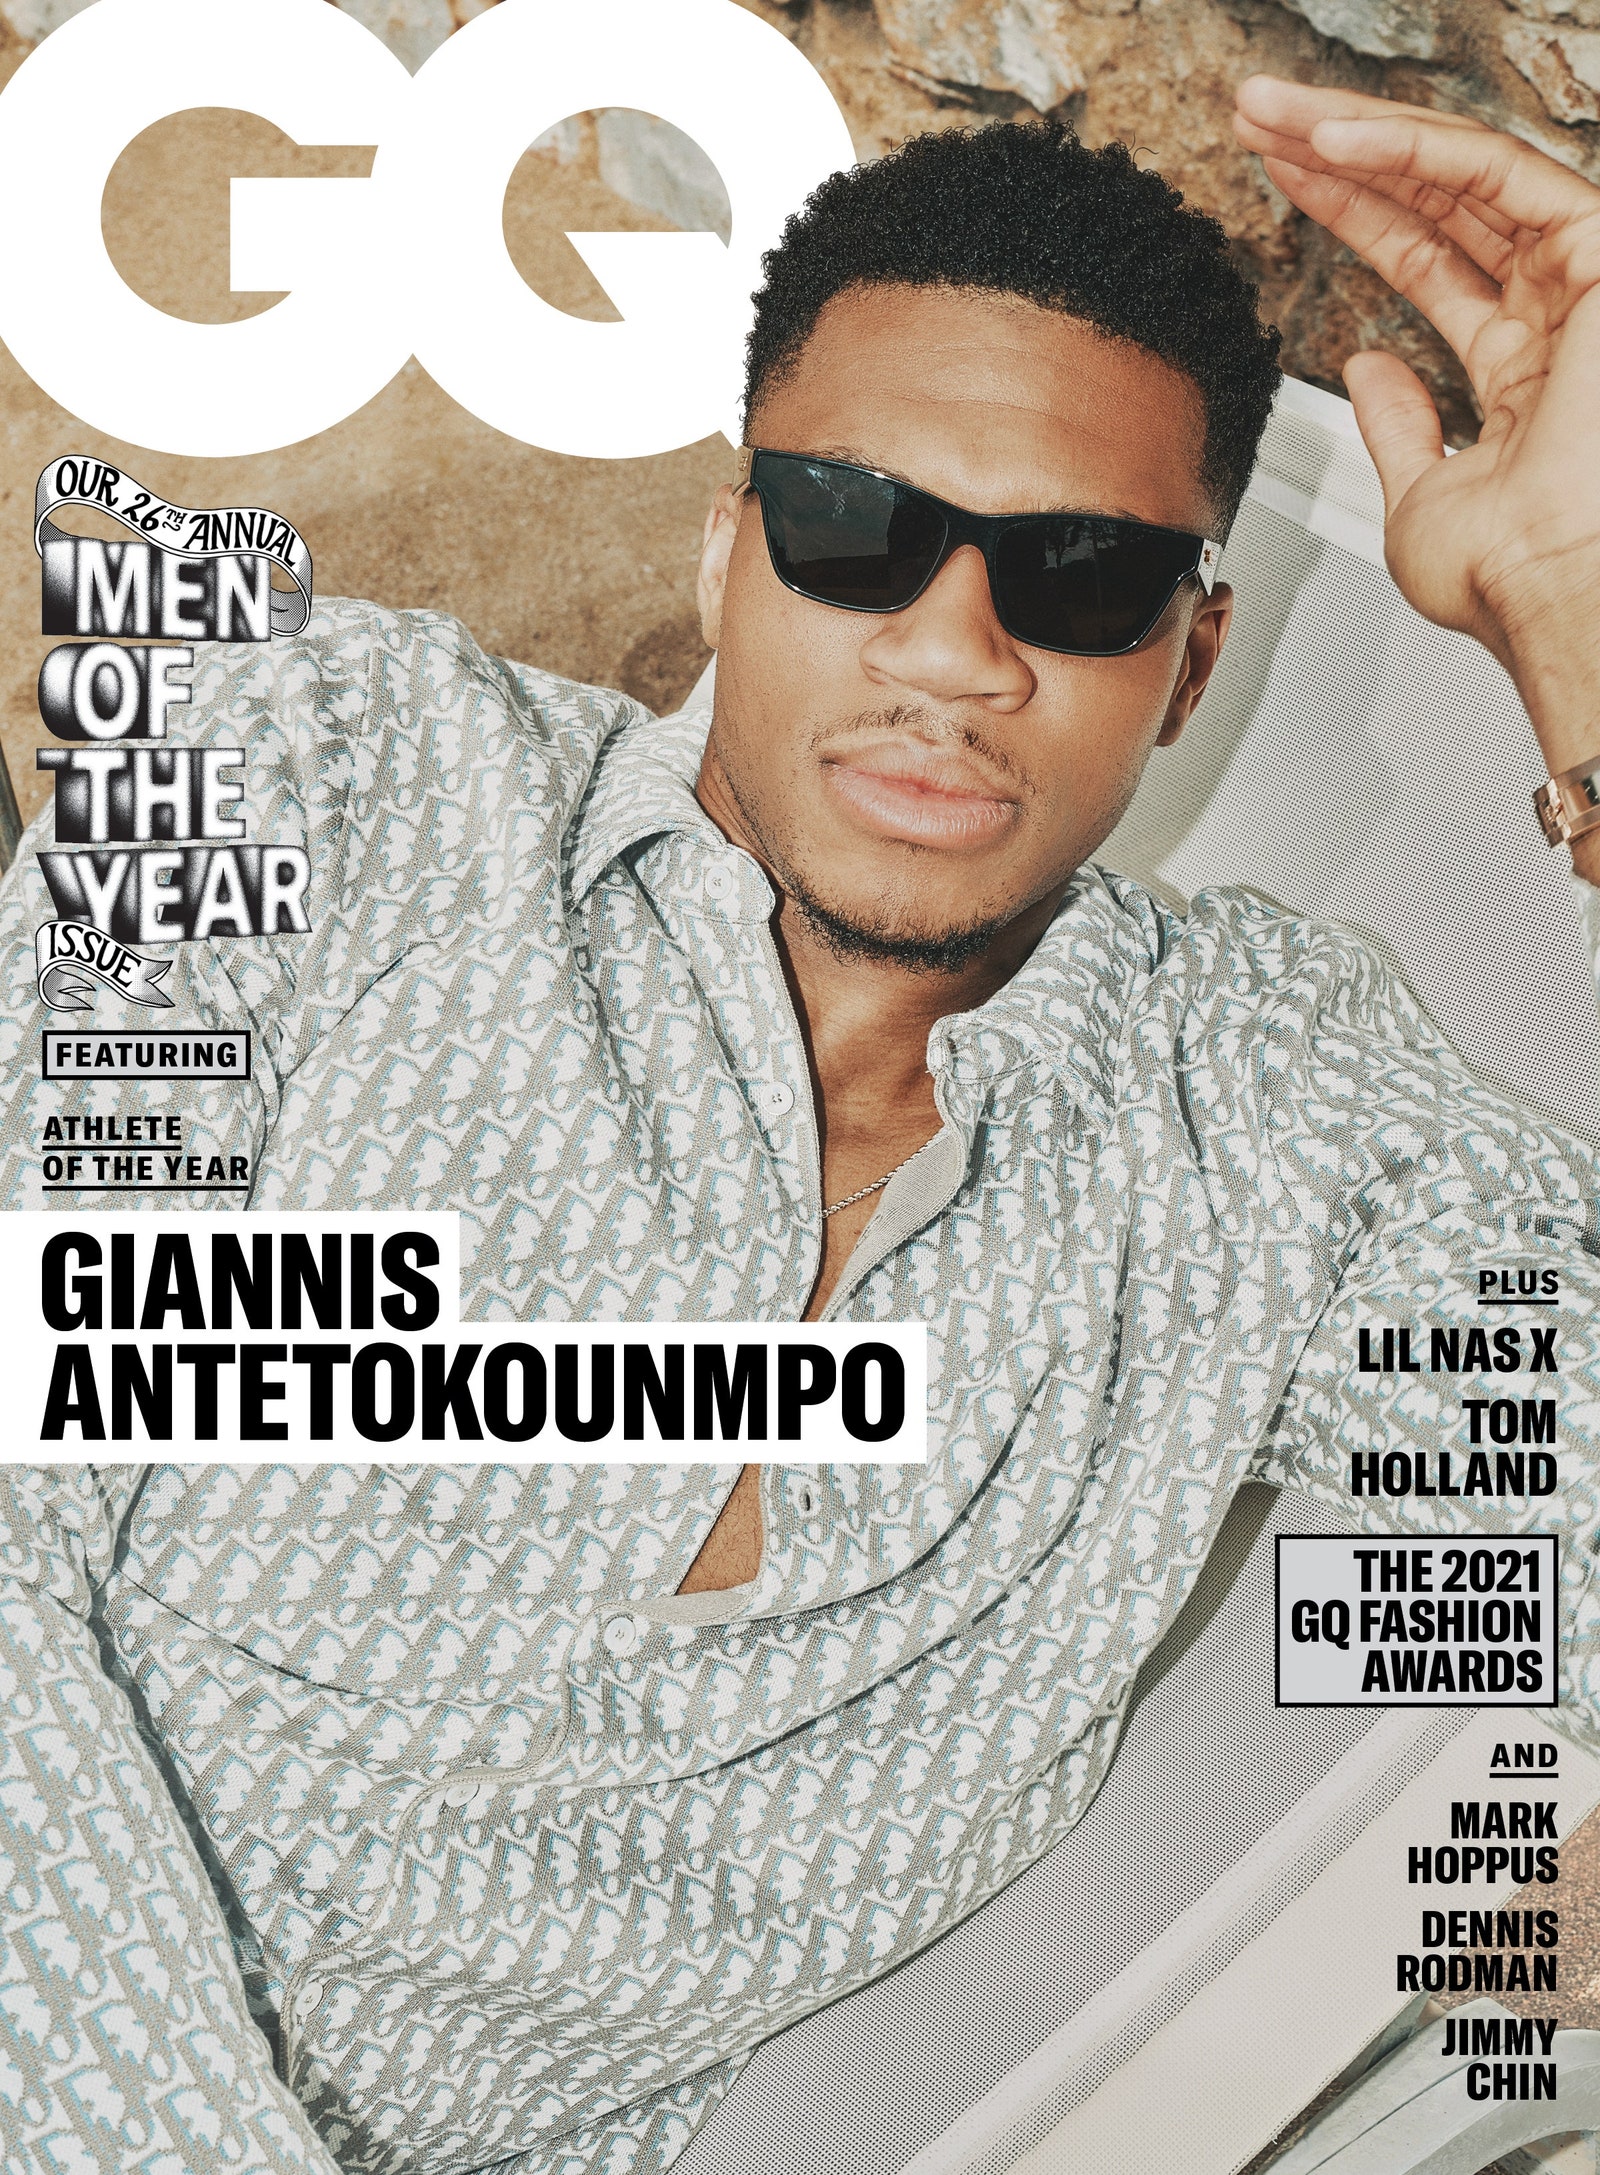 giannis-antetokounmpo-gq-cover-men-of-the-year-2021.jpeg